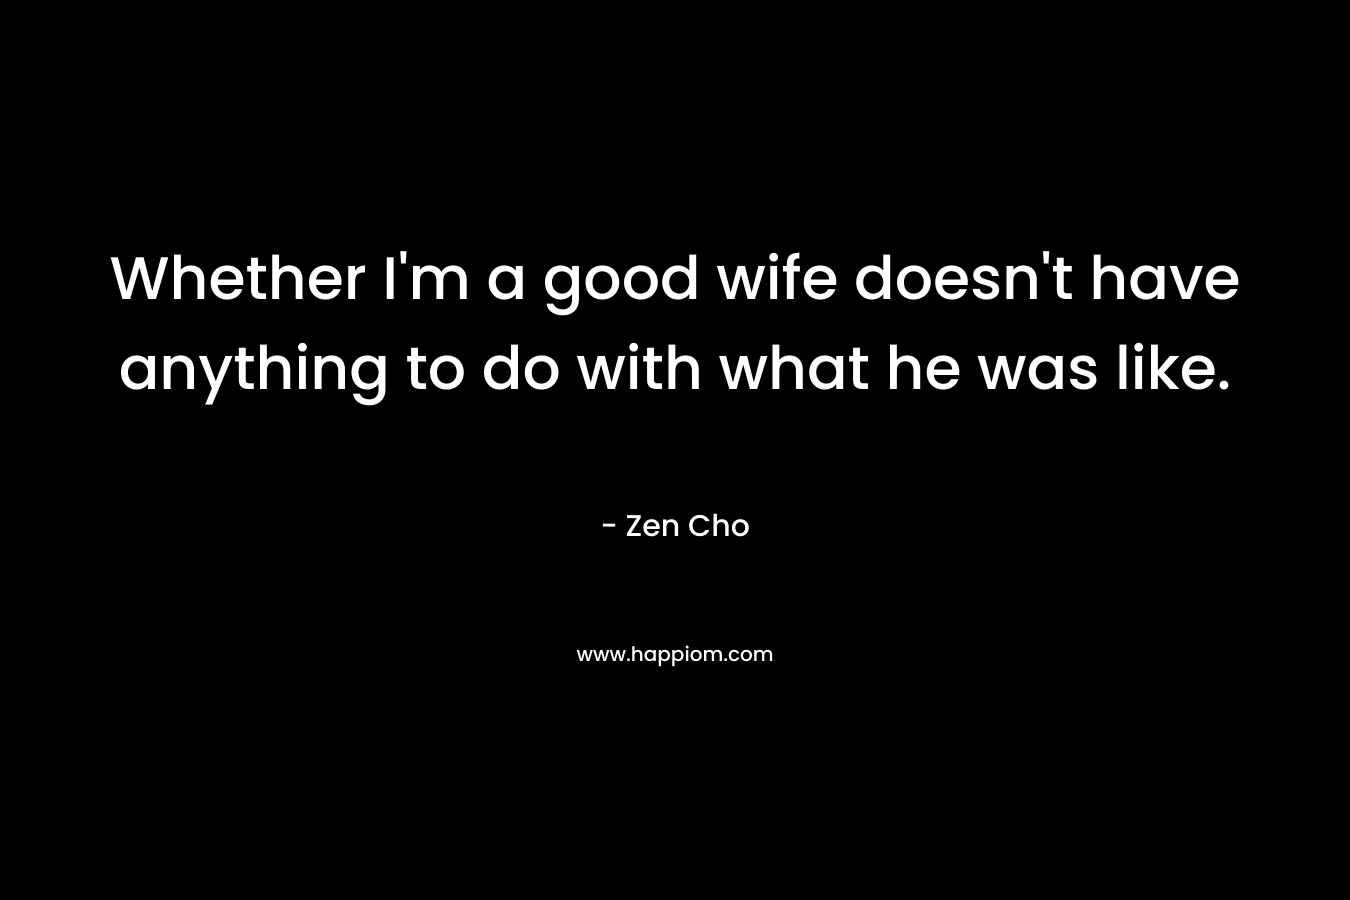 Whether I'm a good wife doesn't have anything to do with what he was like.